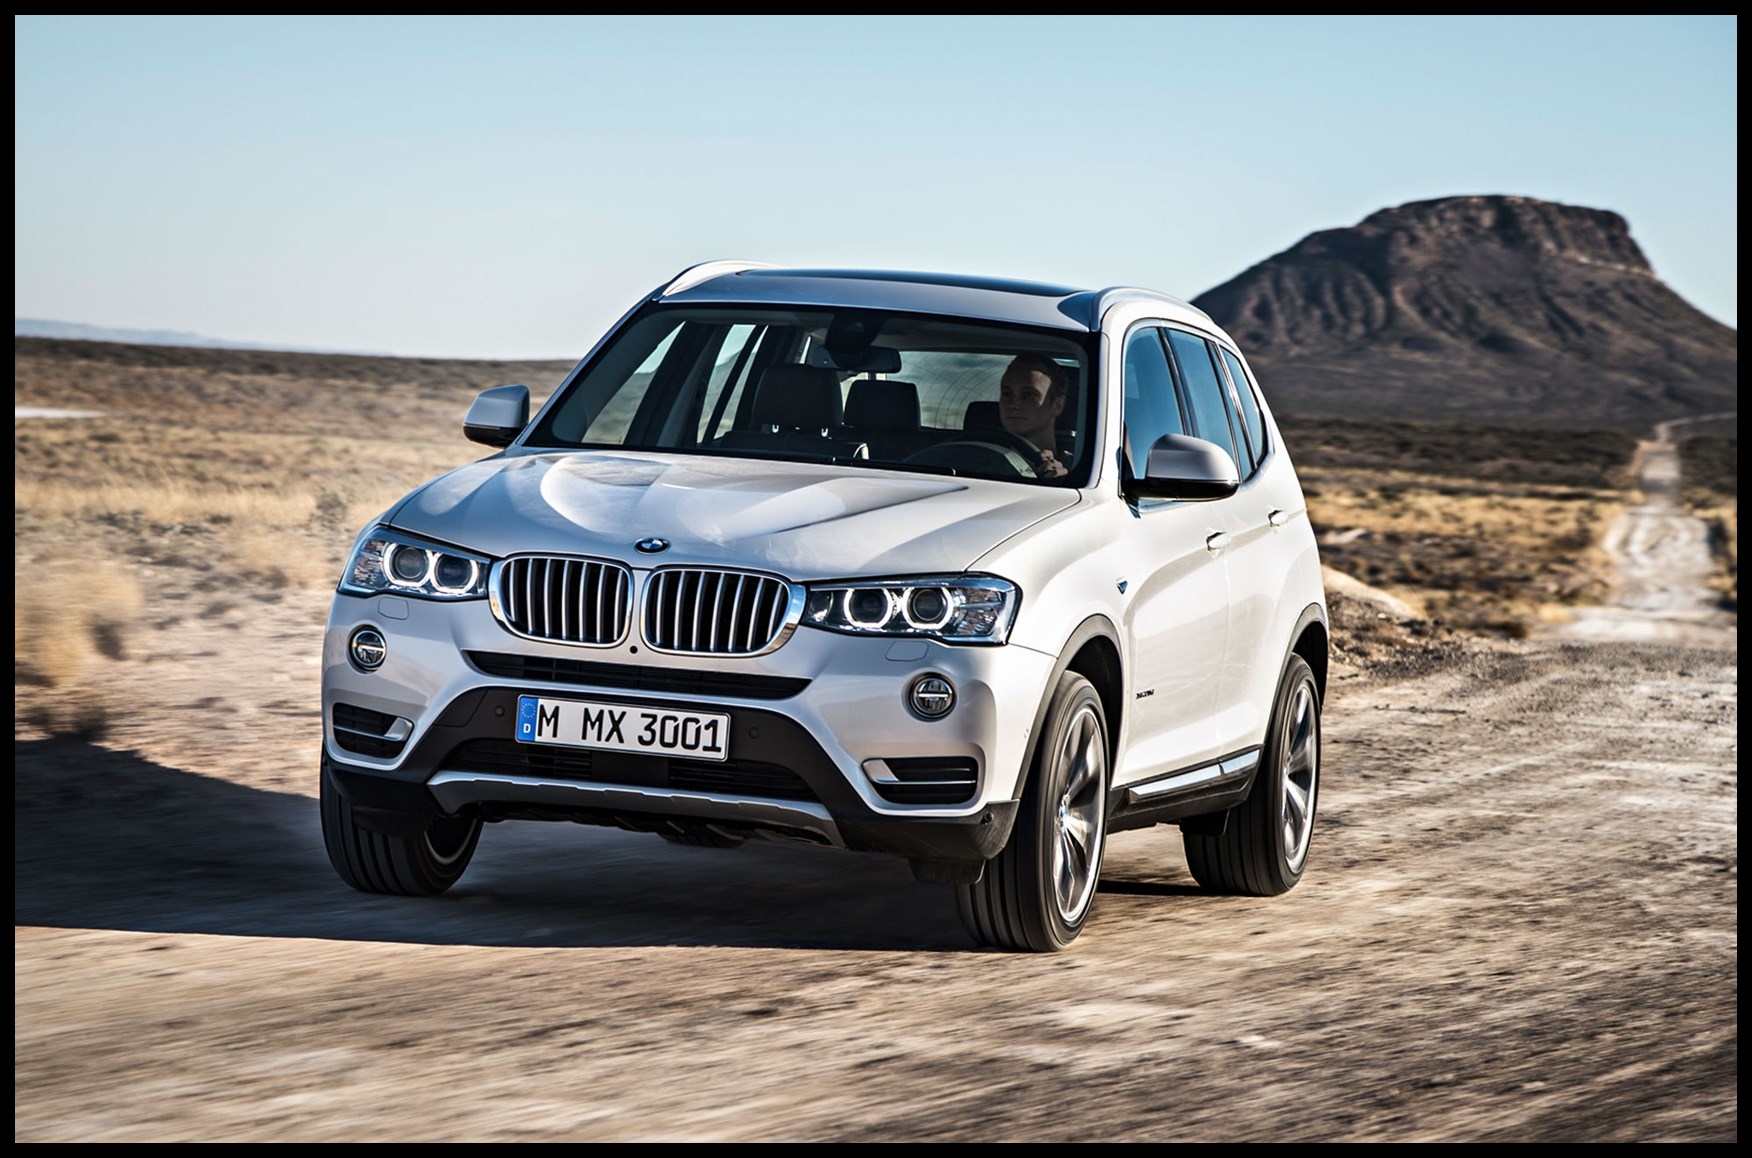 The BMW X3 was given a light facelift in the second half of 2014